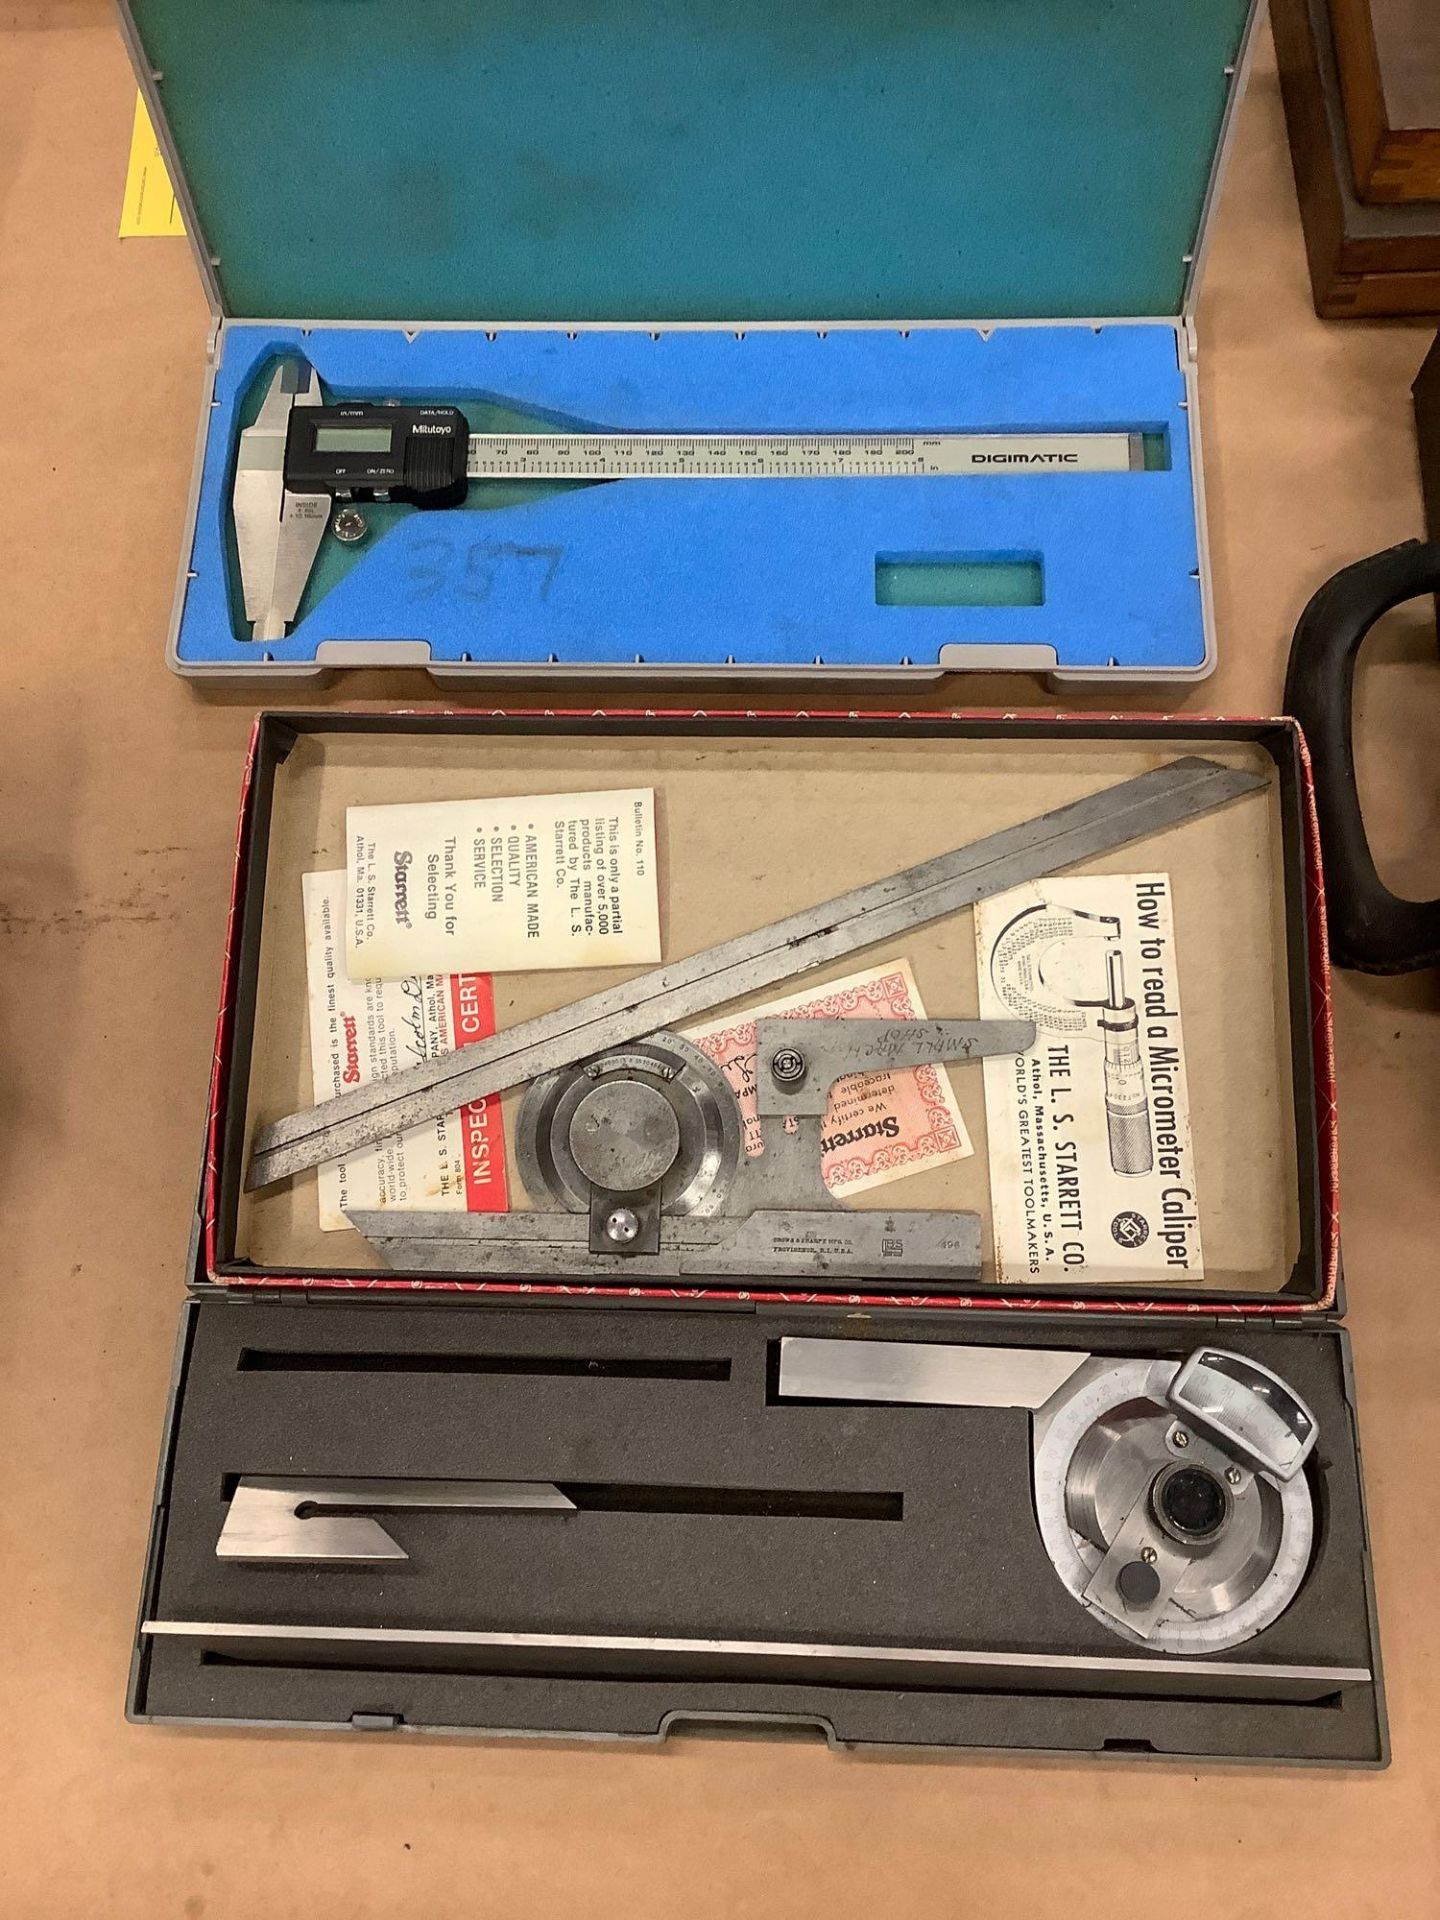 Lot of 3 Calipers - Assorted Types and Brands